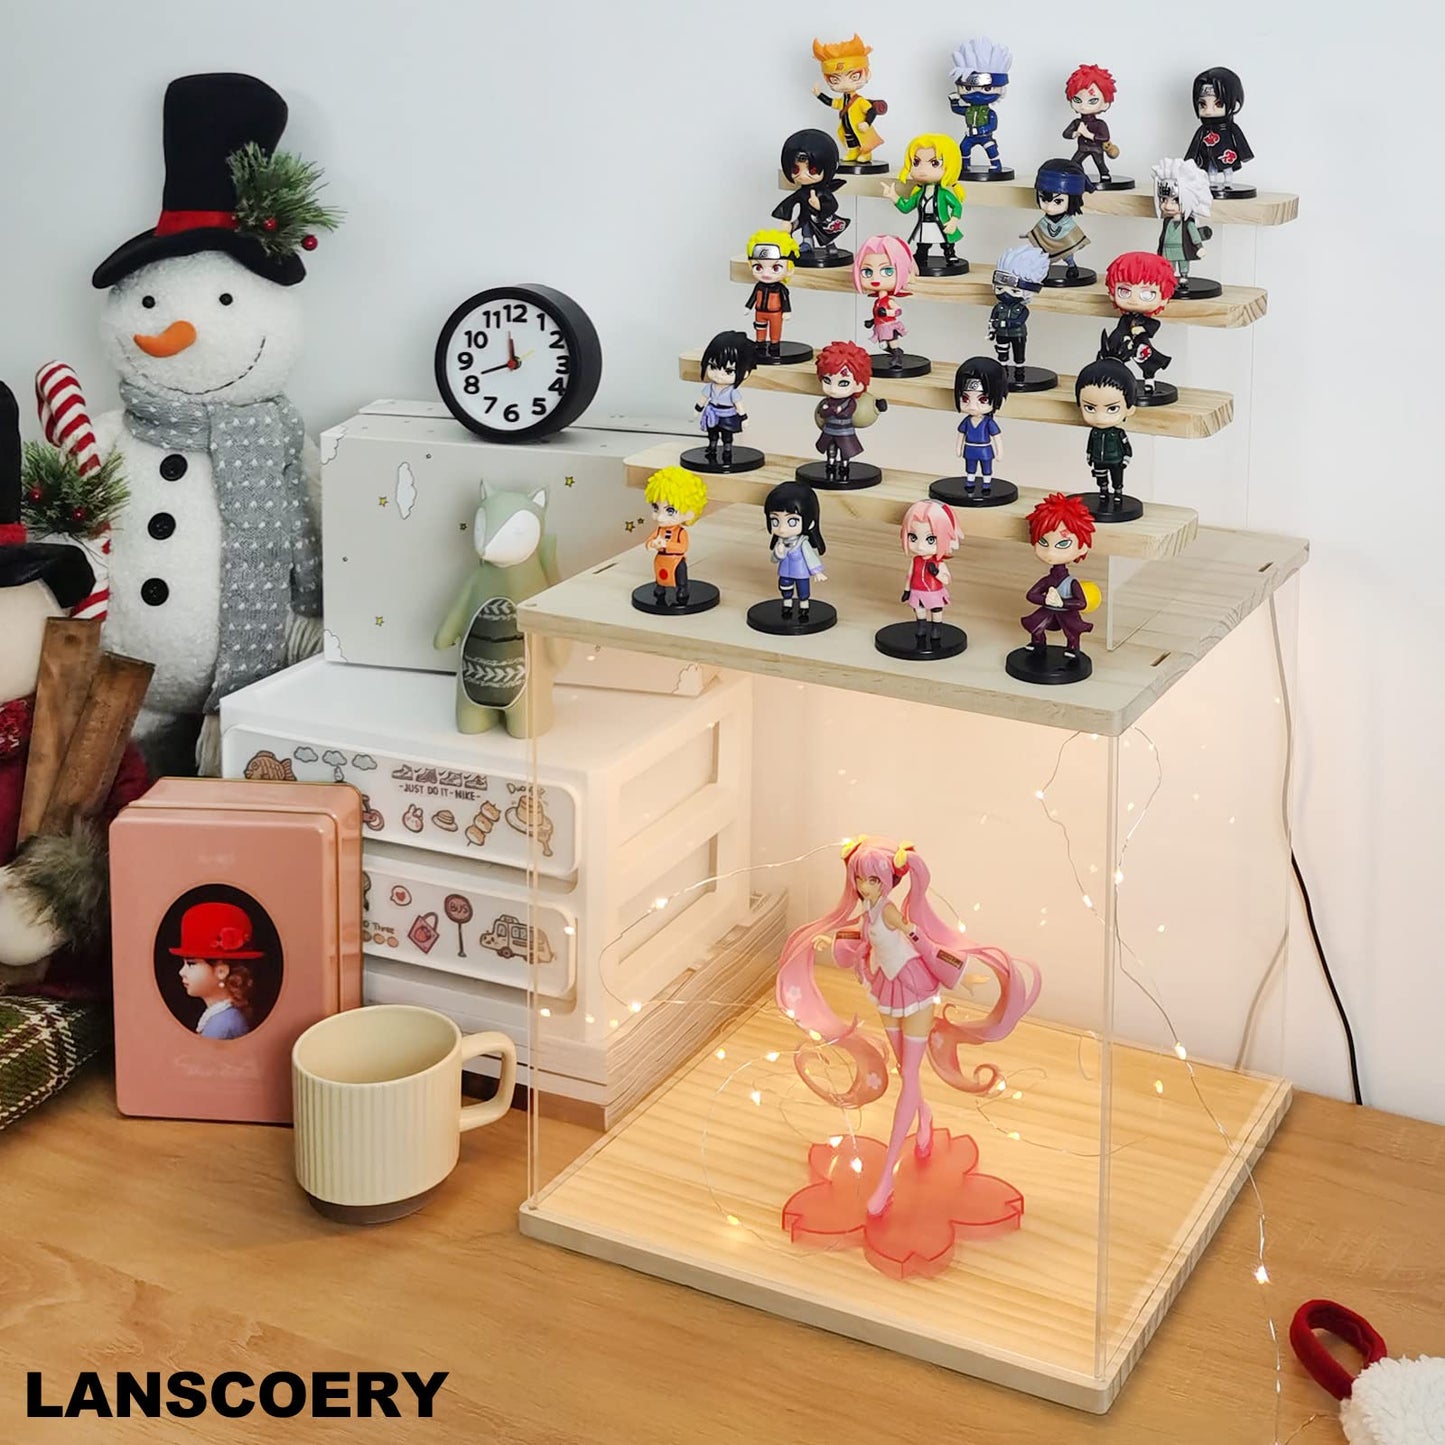 LANSCOERY Clear Acrylic Display Case with Light, Assemble 5 Tier Display Box Stand with Wooden Base, Dustproof Protection Showcase for Collectibles